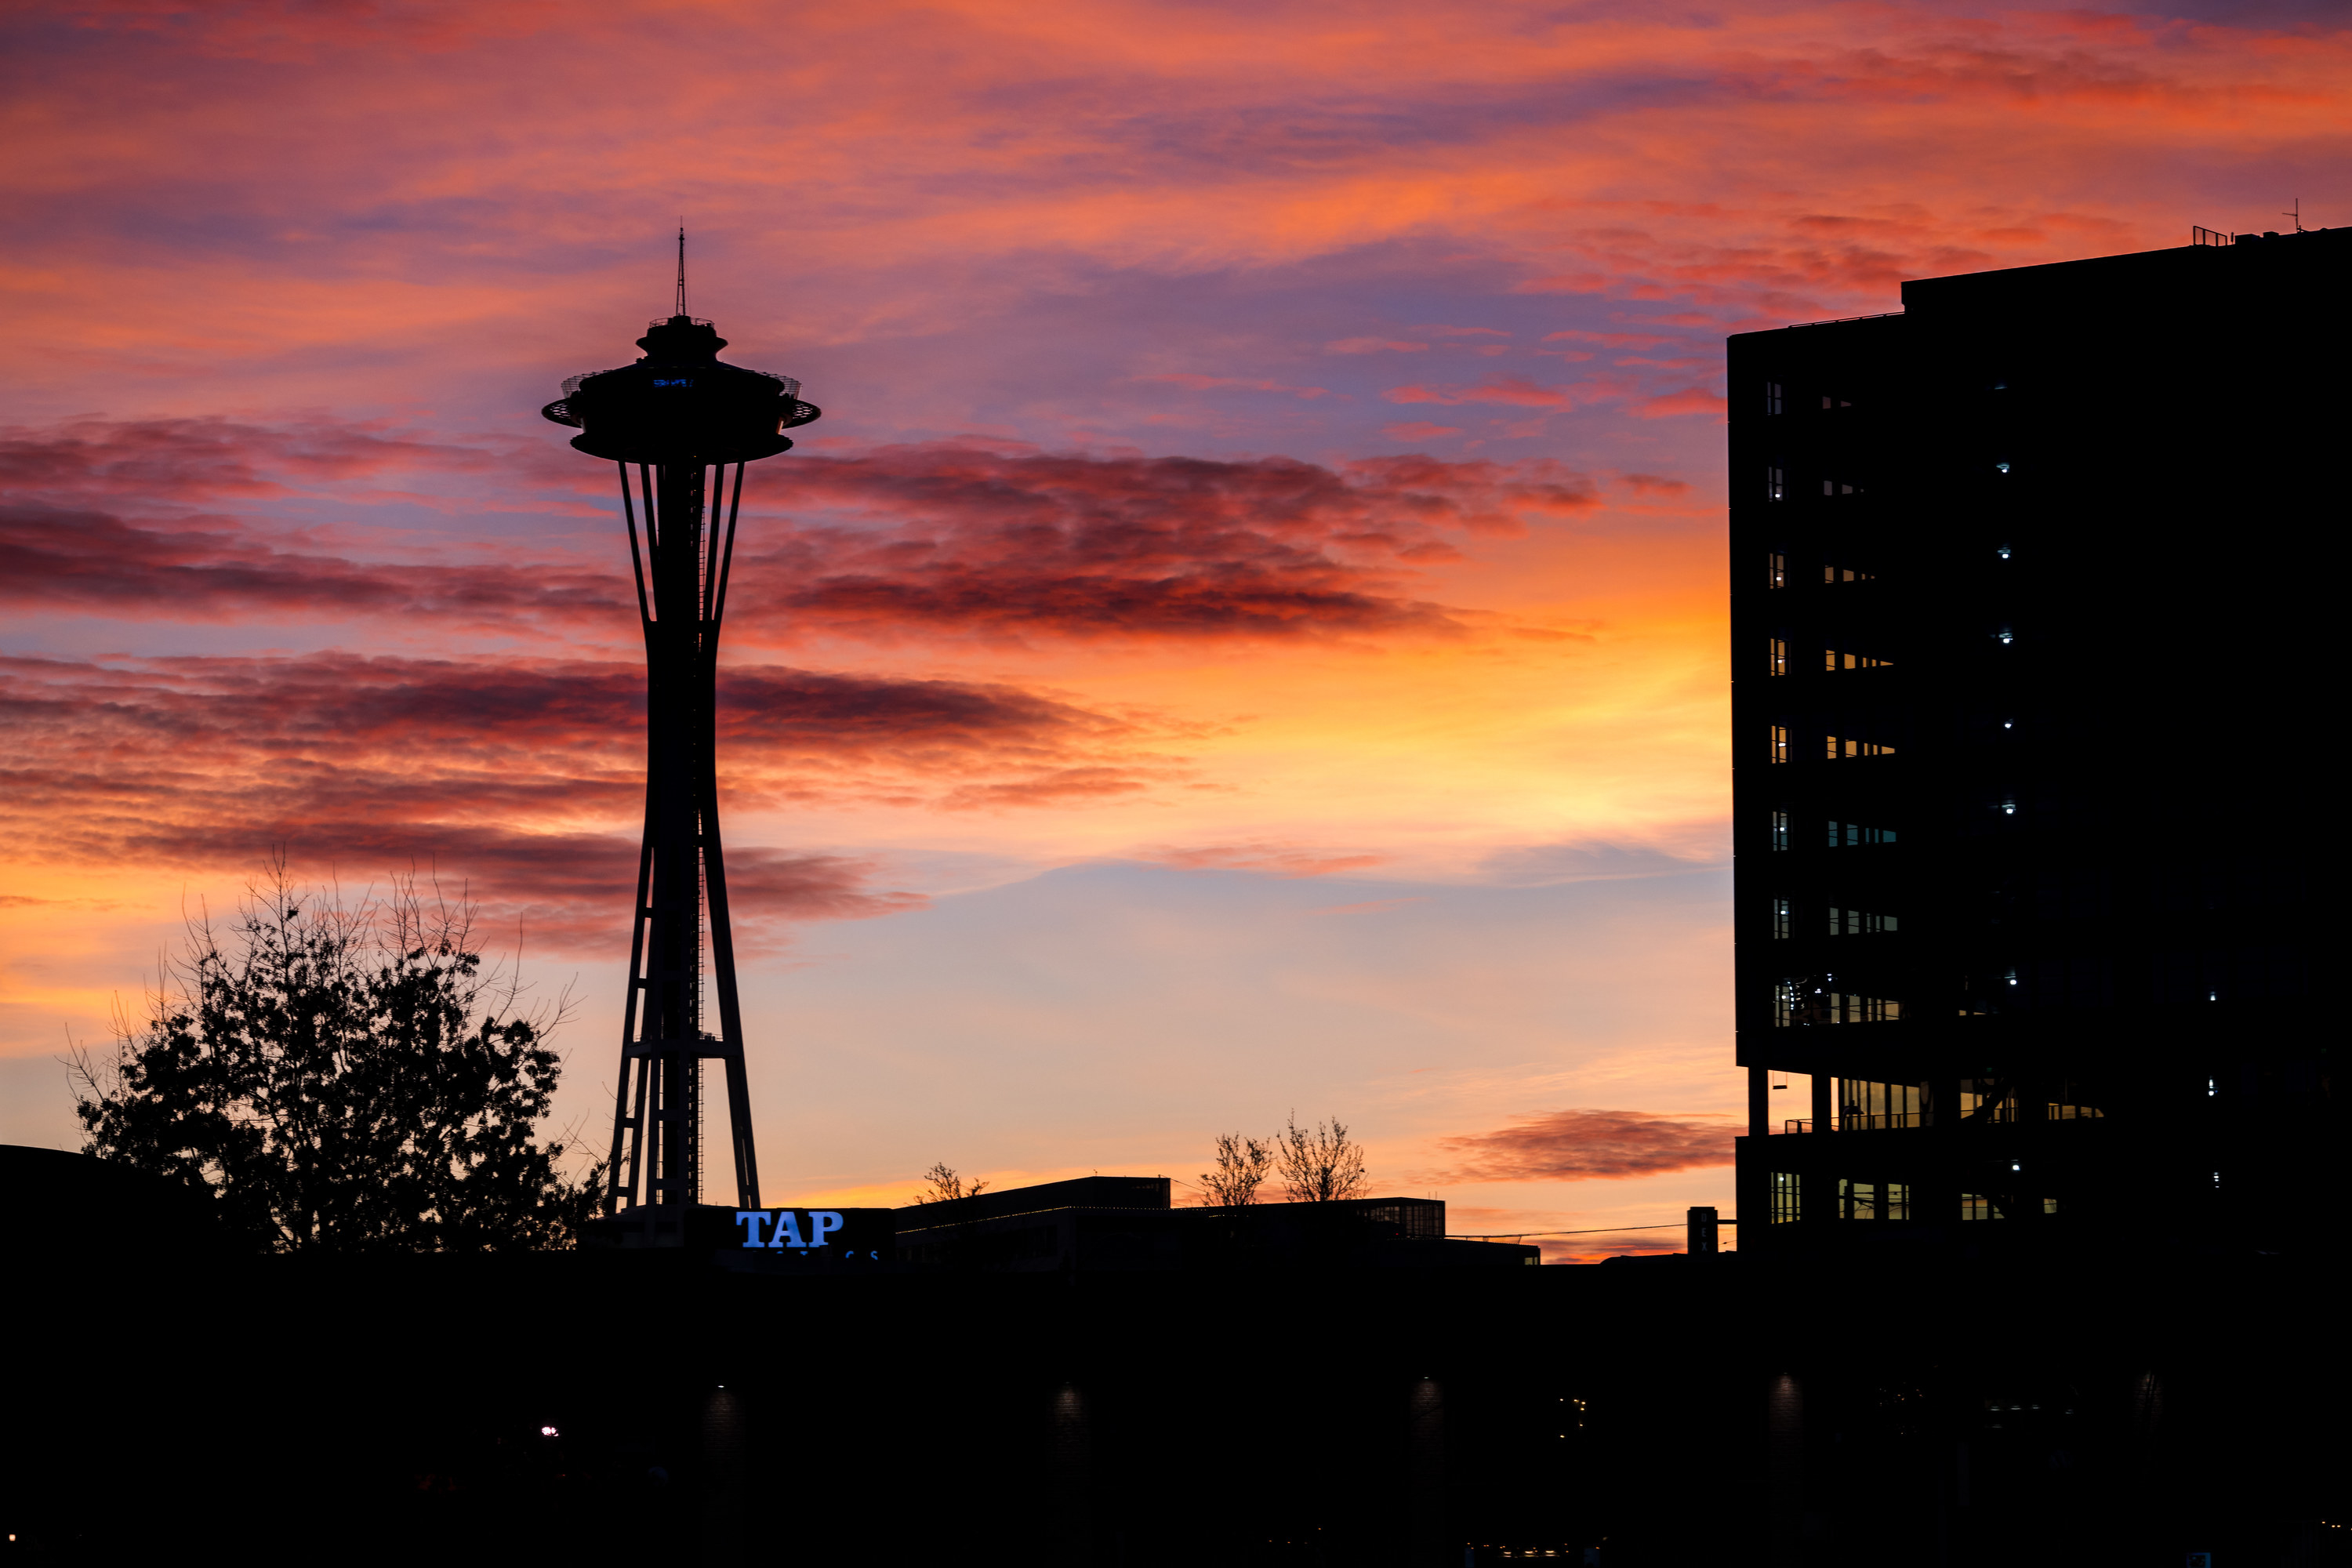 The Space Needle in Seattle, WA in front of a bright orange and pink sunset